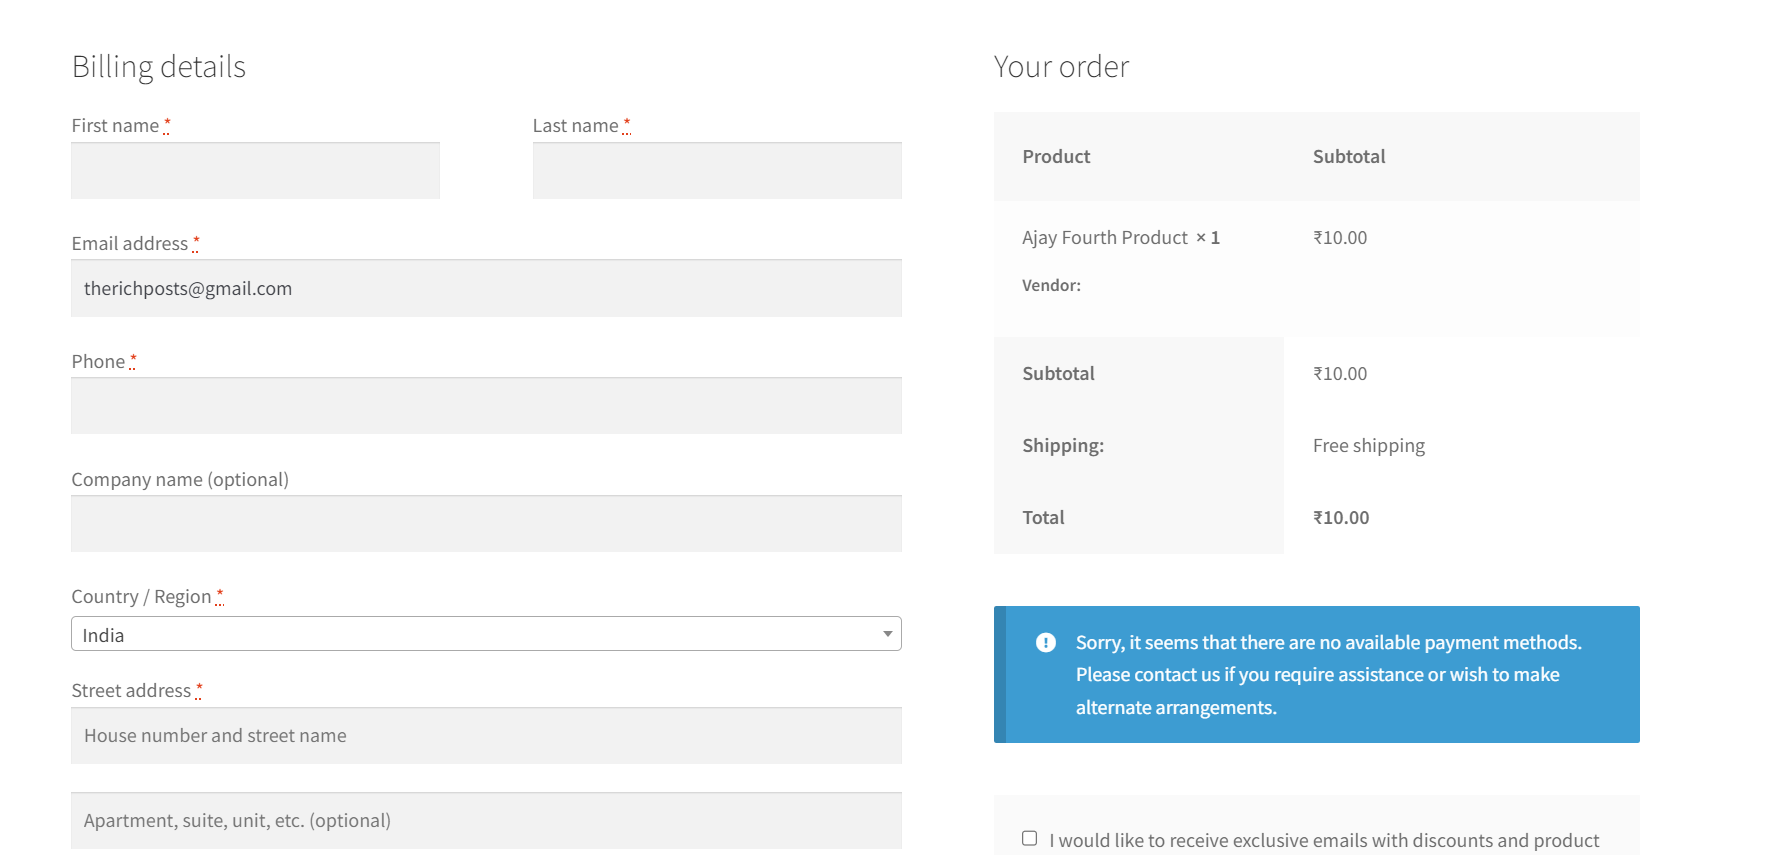 How to reorder checkout fields in WooCommerce 8+?